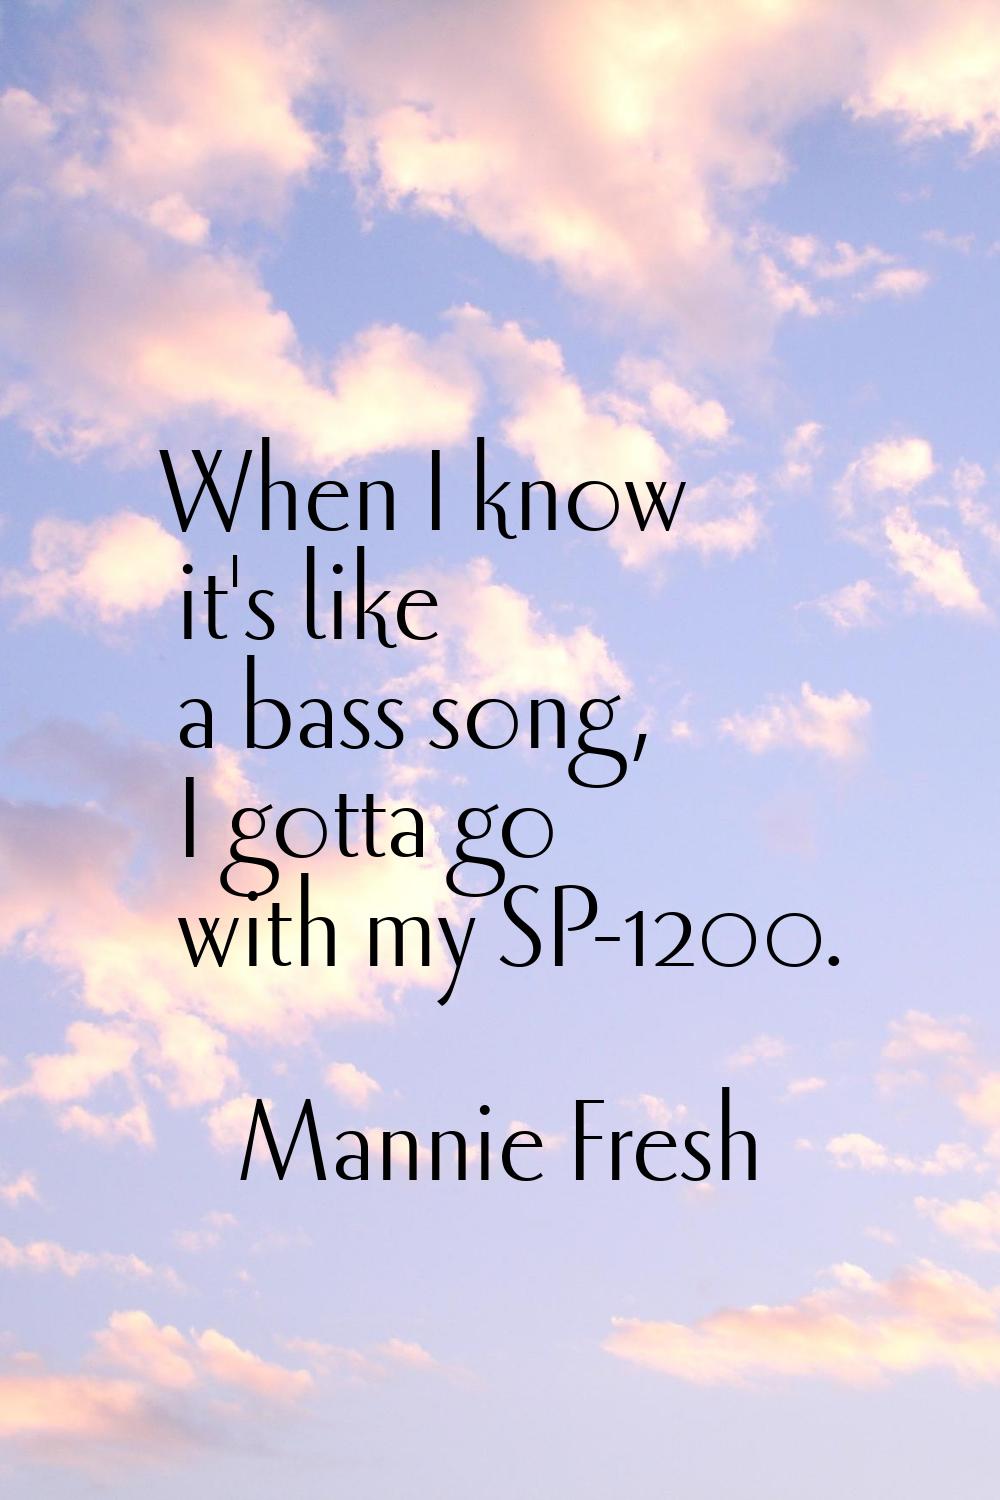 When I know it's like a bass song, I gotta go with my SP-1200.